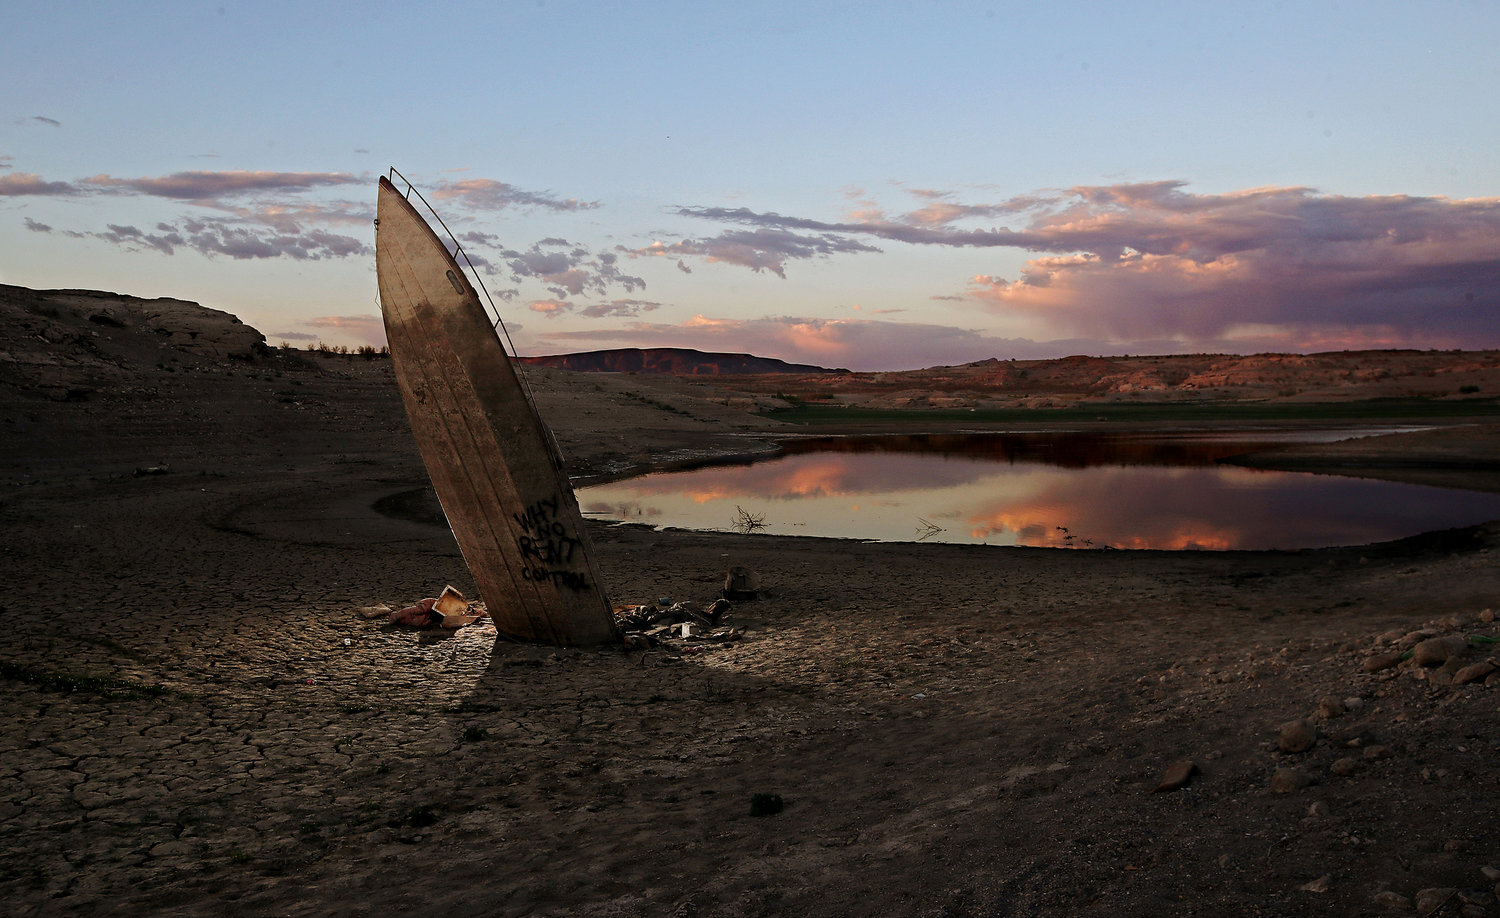 A boat that sank in Lake Mead resurfaces as water continues to recede in the nation's largest reservoir. Four sets of human remains have been found in recent months. (Luis Sinco/Los Angeles Times/TNS)